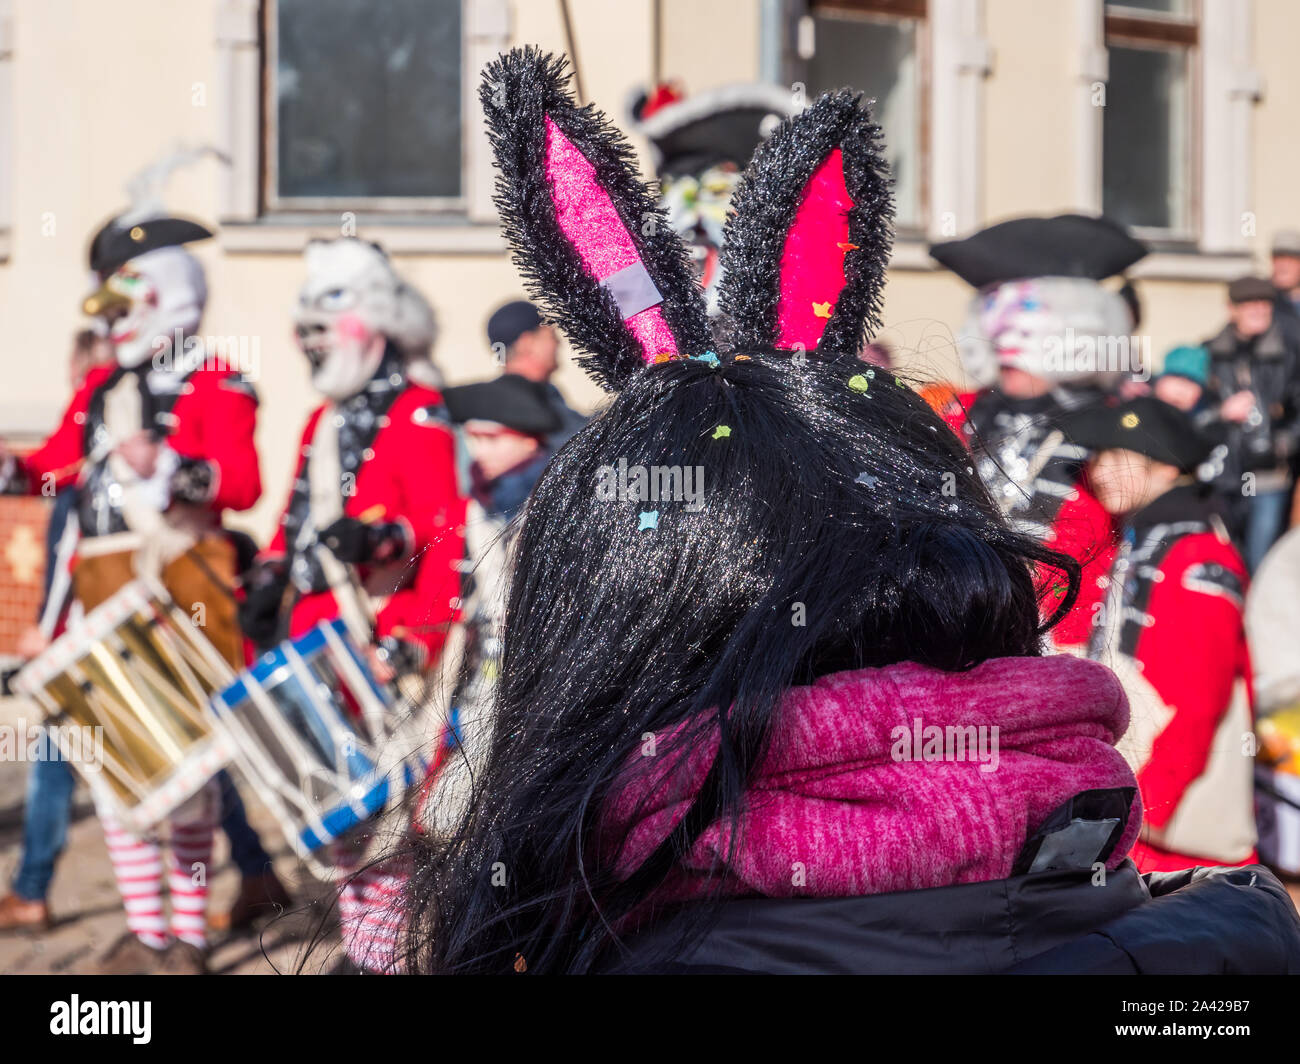 Bunny costume at carnival Stock Photo - Alamy